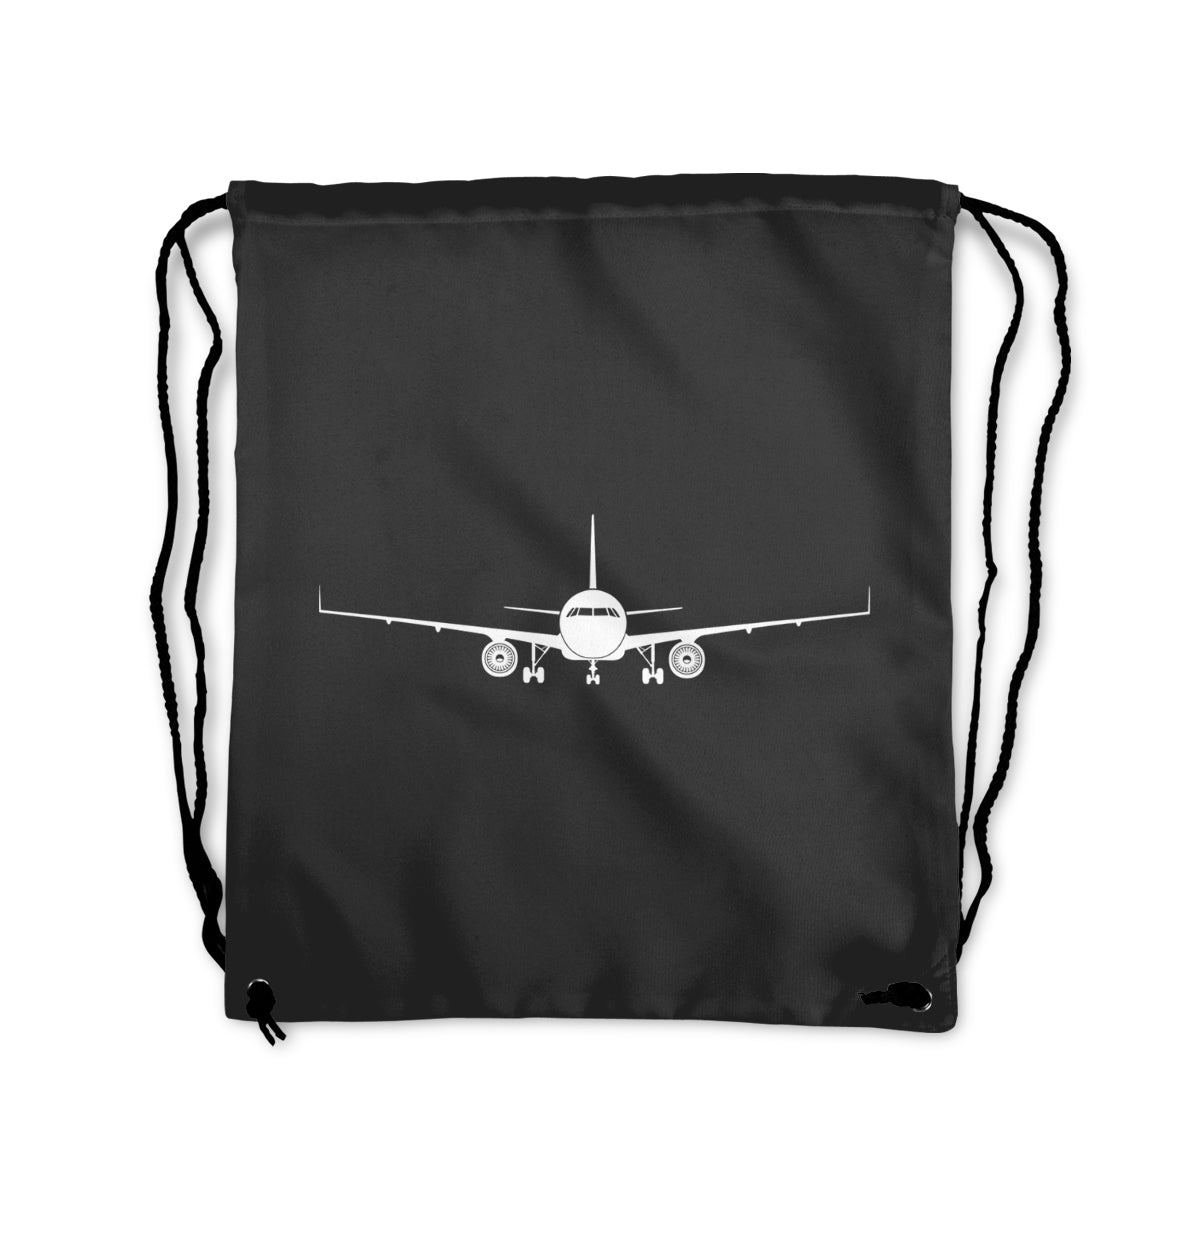 Airbus A320 Silhouette Designed Drawstring Bags